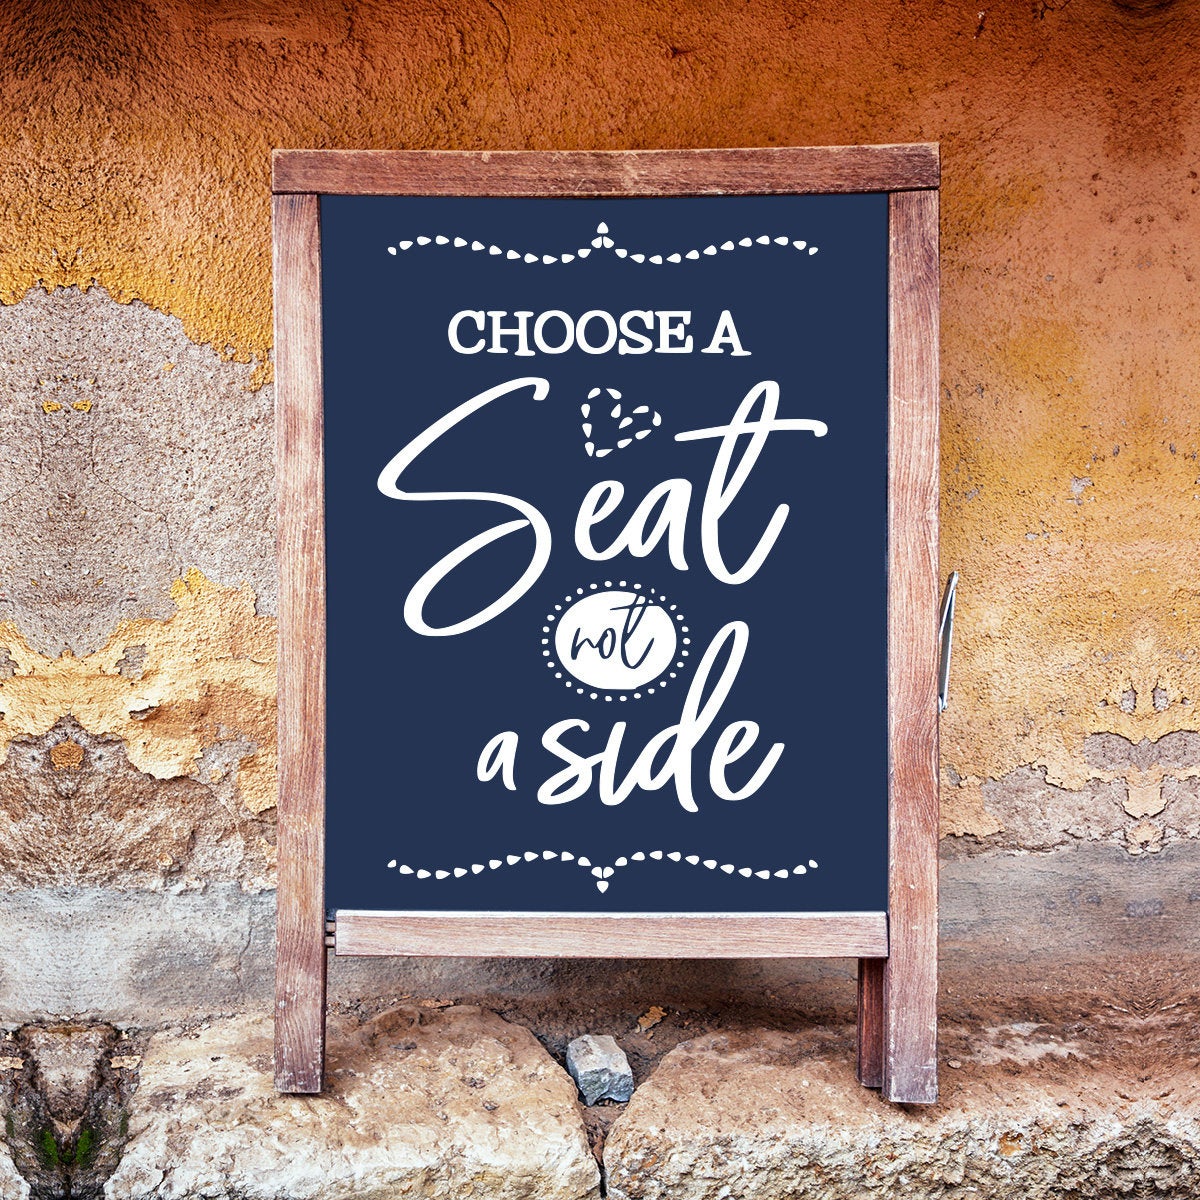 Welcome to the Unplugged Wedding and Pick a Seat Not a Side Sign Decal, Rustic Wedding Ceremony Sign, Wedding Decor, 2019 Wedding Trends